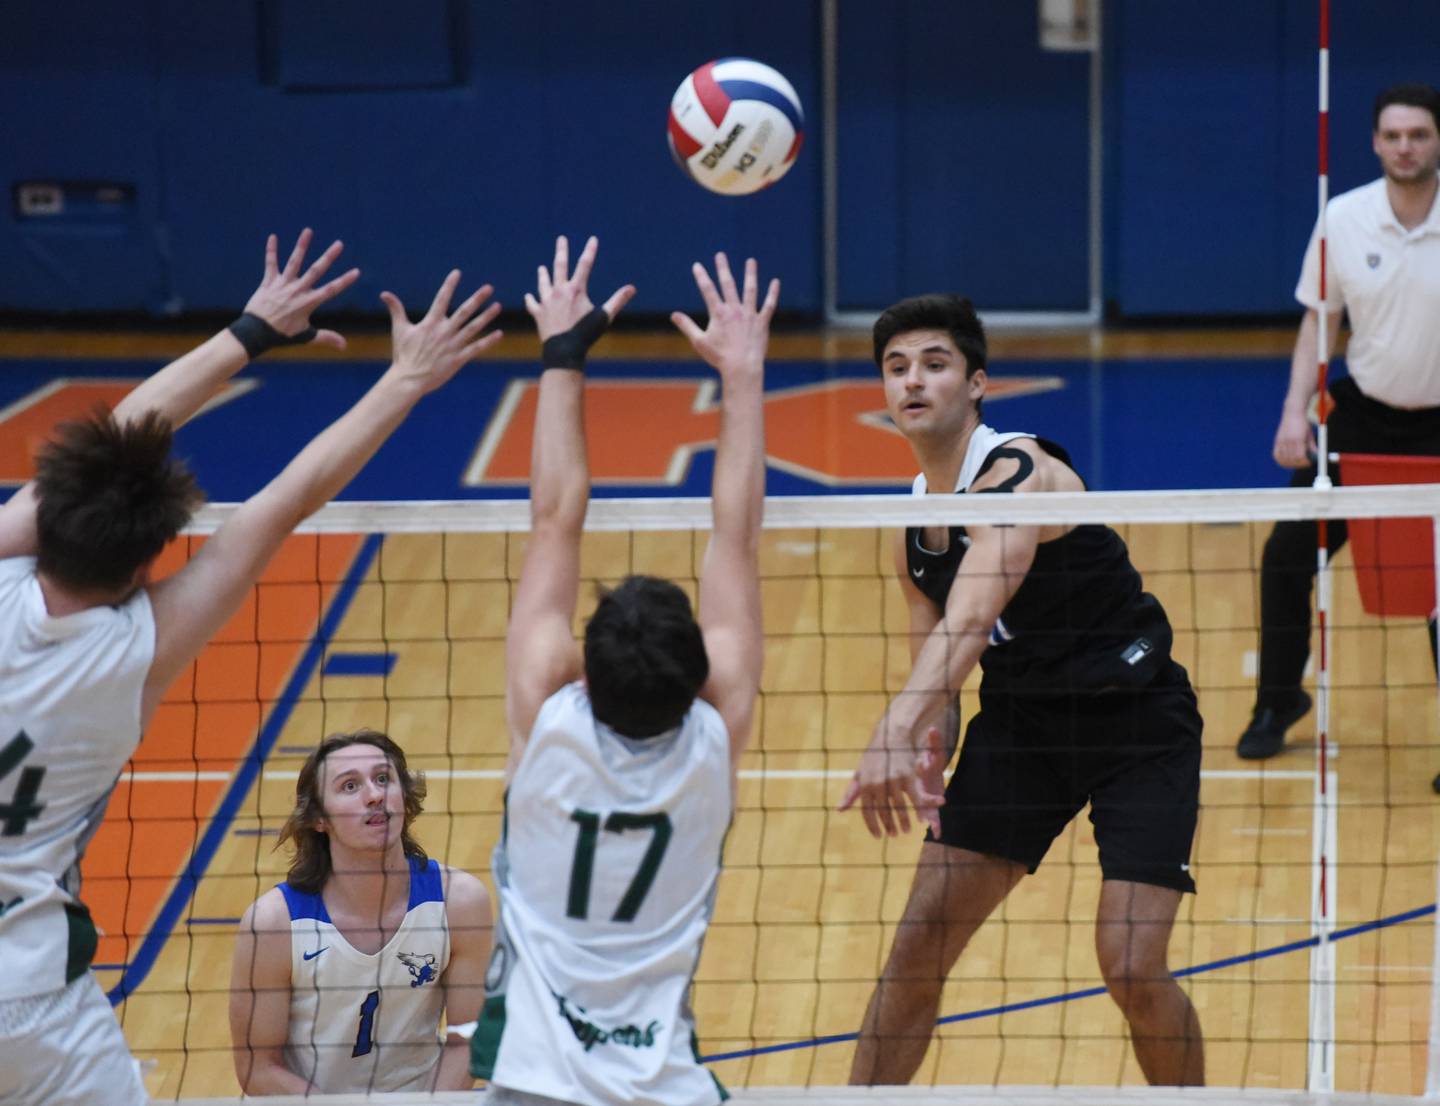 Paul Valade/pvalade@dailyherald.com
Lincoln-Way East's Jon Guch, right, hits into the Glenbard West defense during Saturday’s IHSA state boys volleyball championship match in Hoffman Estates.